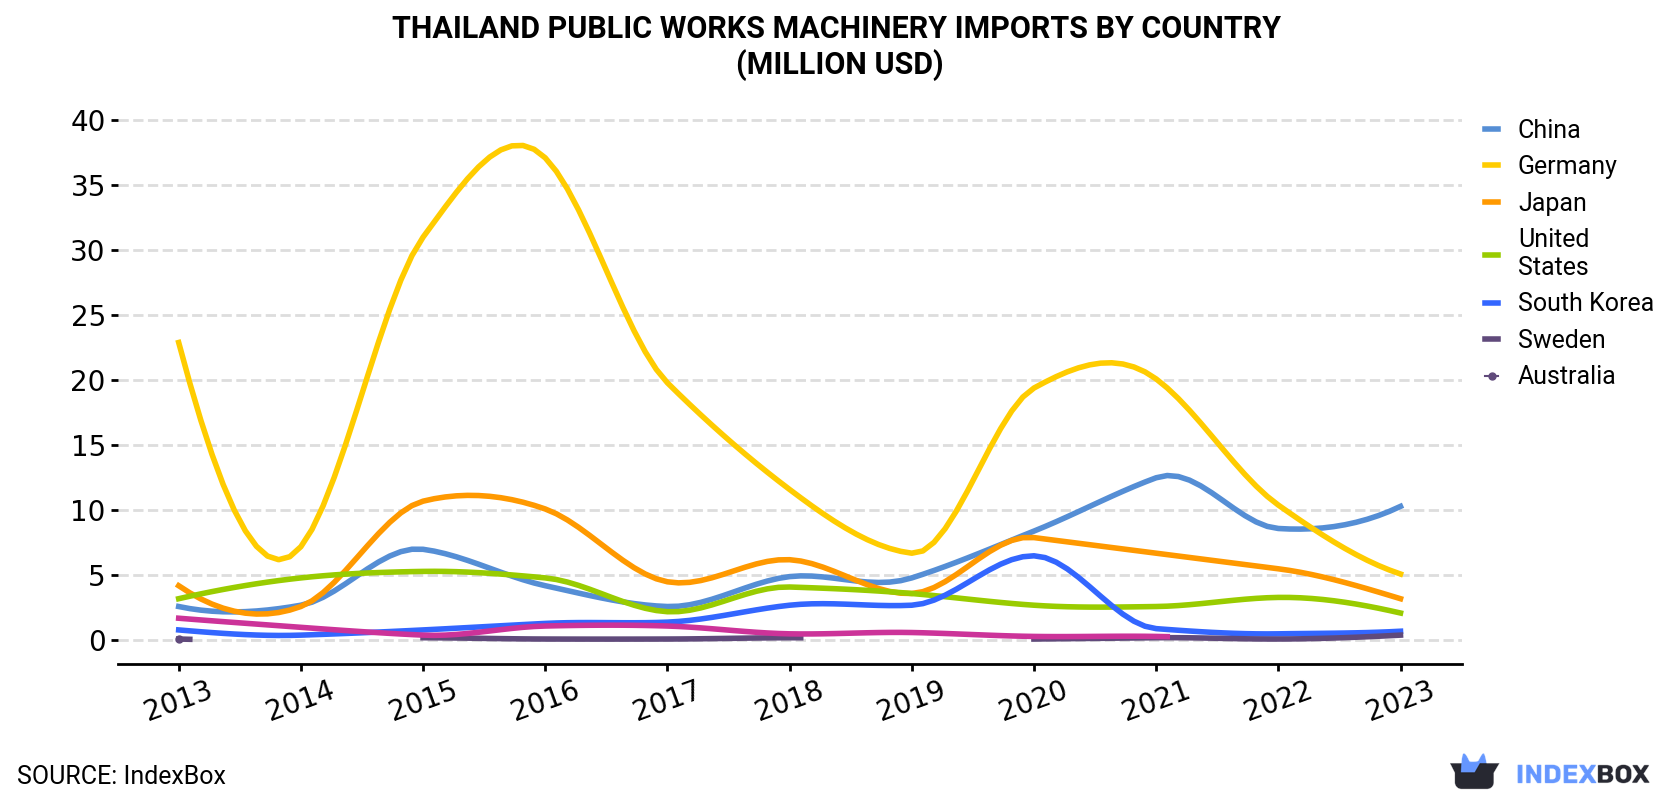 Thailand Public Works Machinery Imports By Country (Million USD)